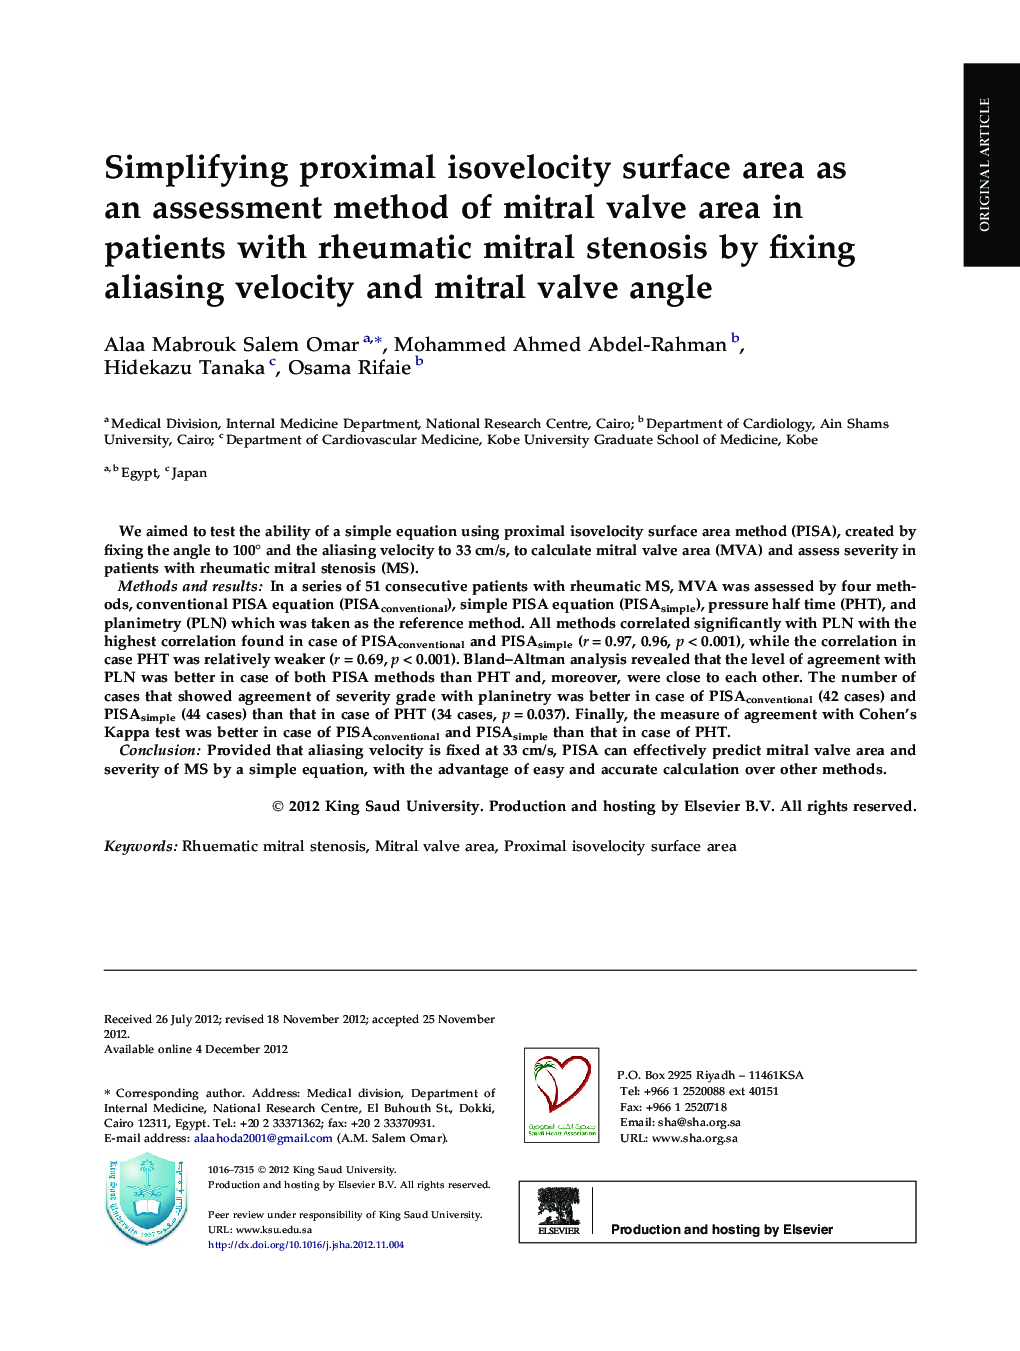 Simplifying proximal isovelocity surface area as an assessment method of mitral valve area in patients with rheumatic mitral stenosis by fixing aliasing velocity and mitral valve angle 